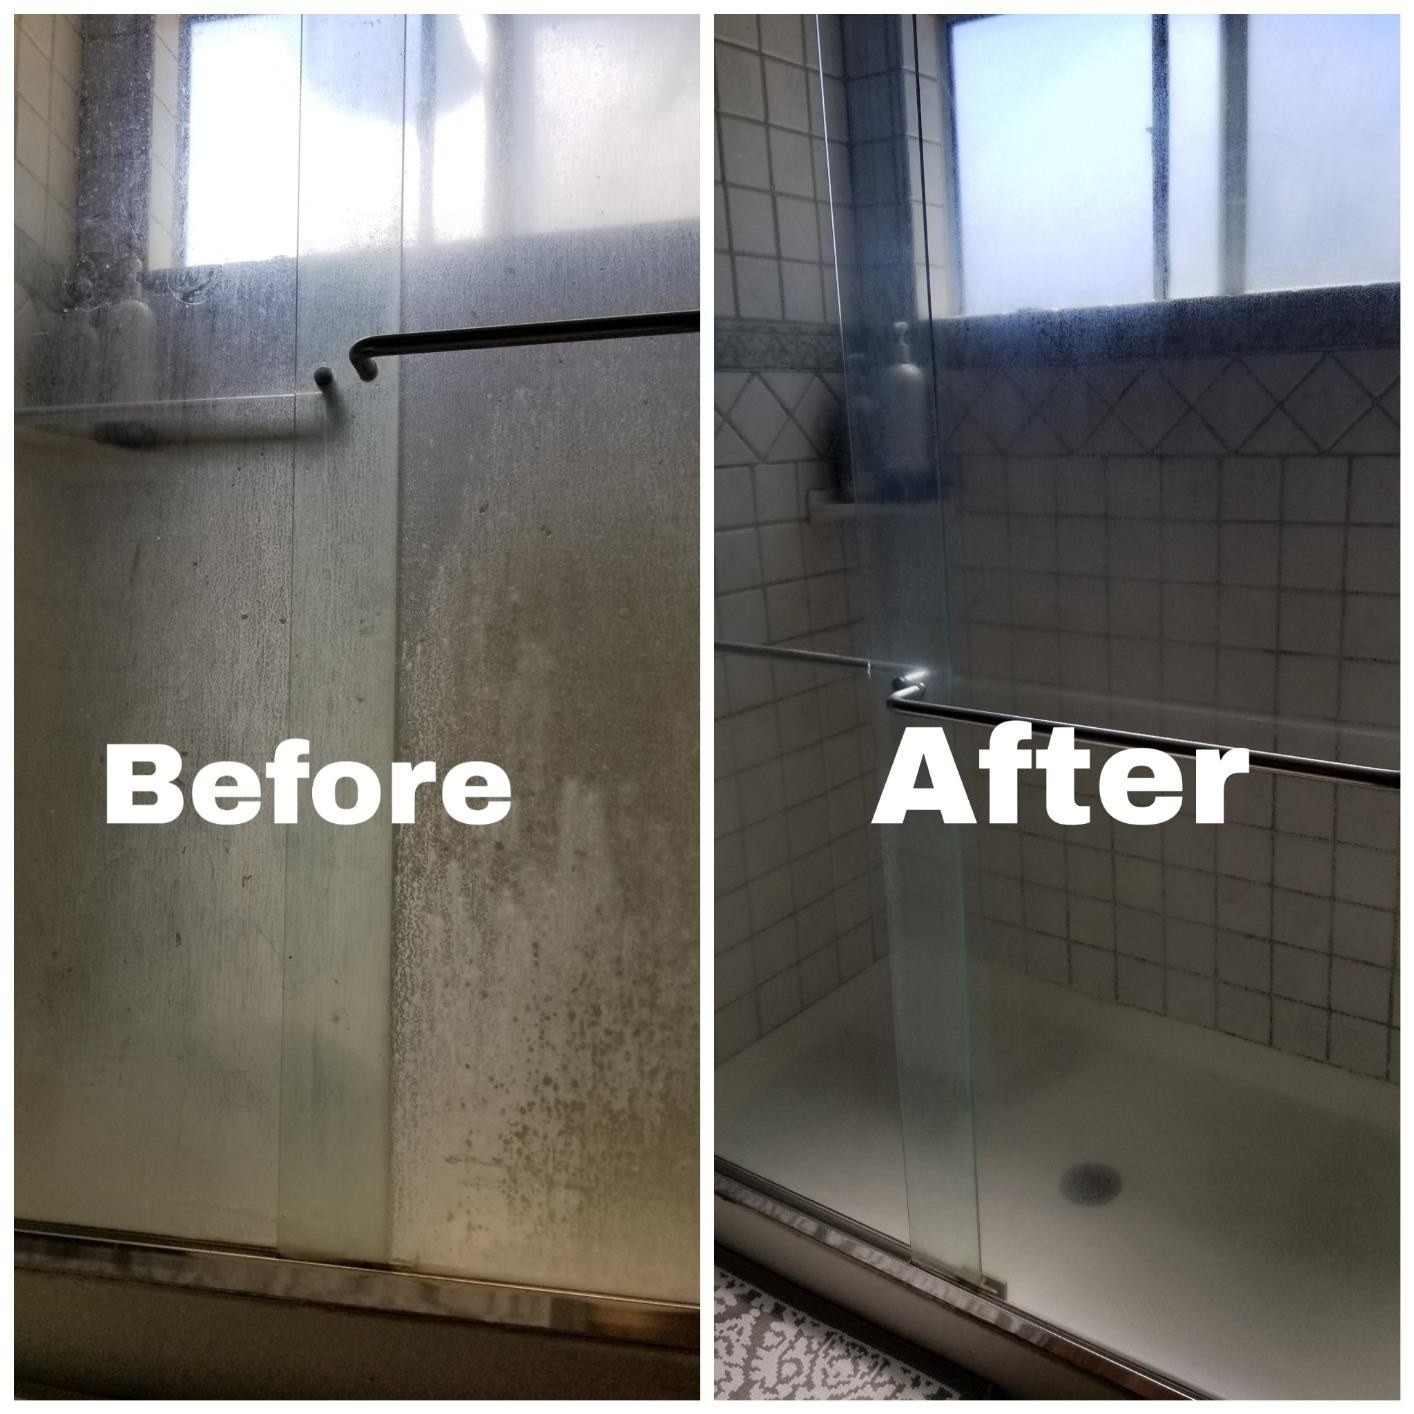 Reviewer before and after showing the cleaner removed hard water stains on a glass shower door